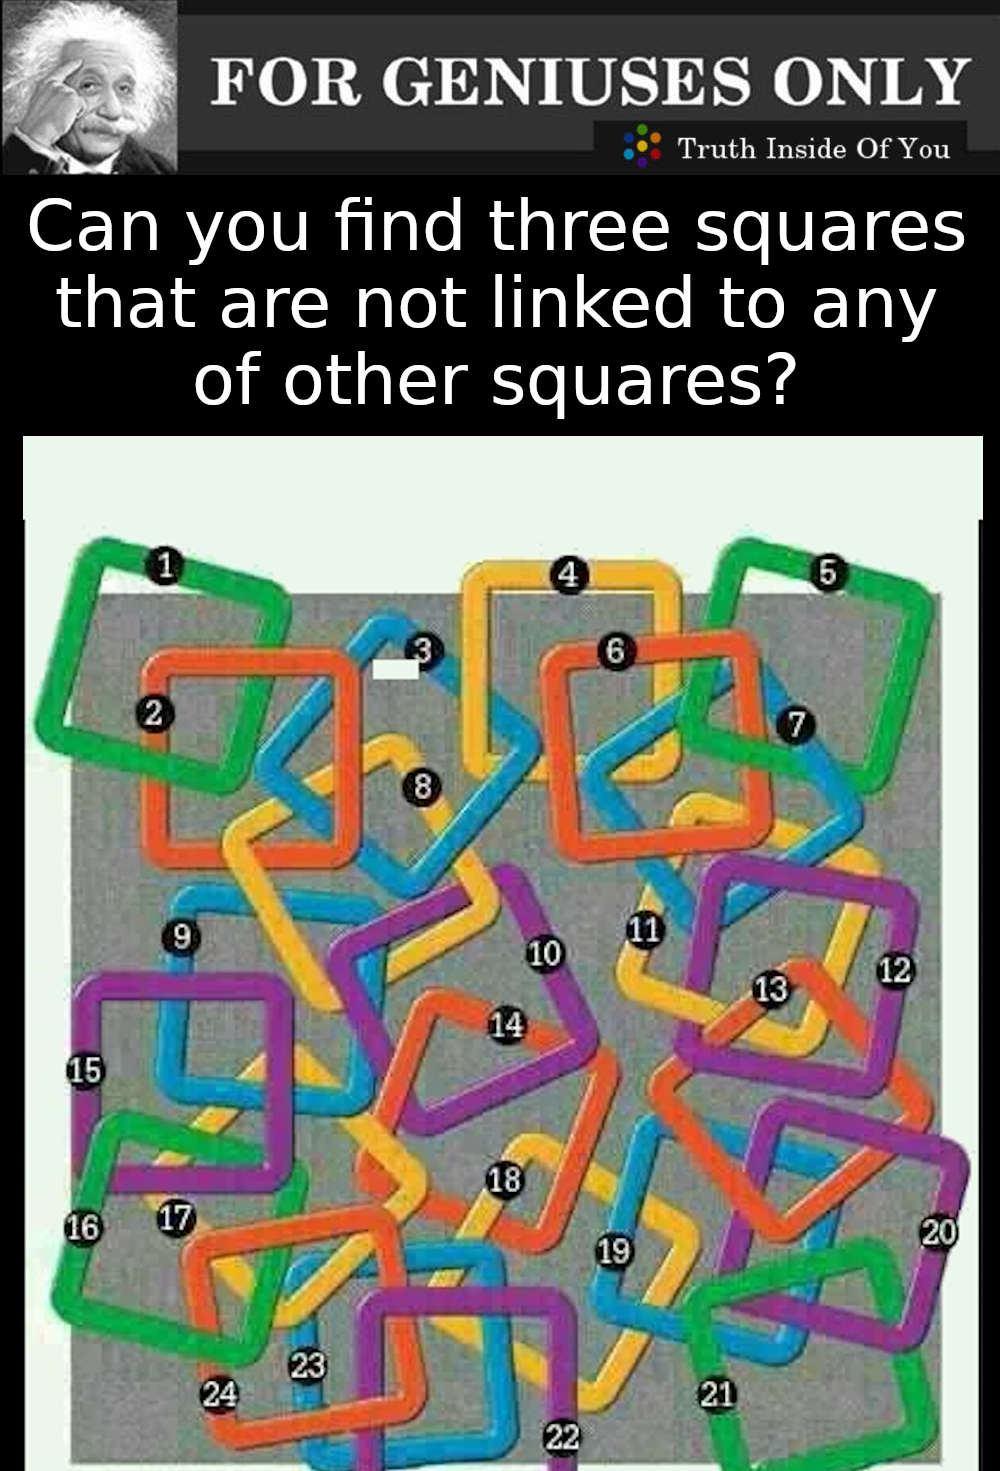 Can you find three squares that are not linked to any of other squares?